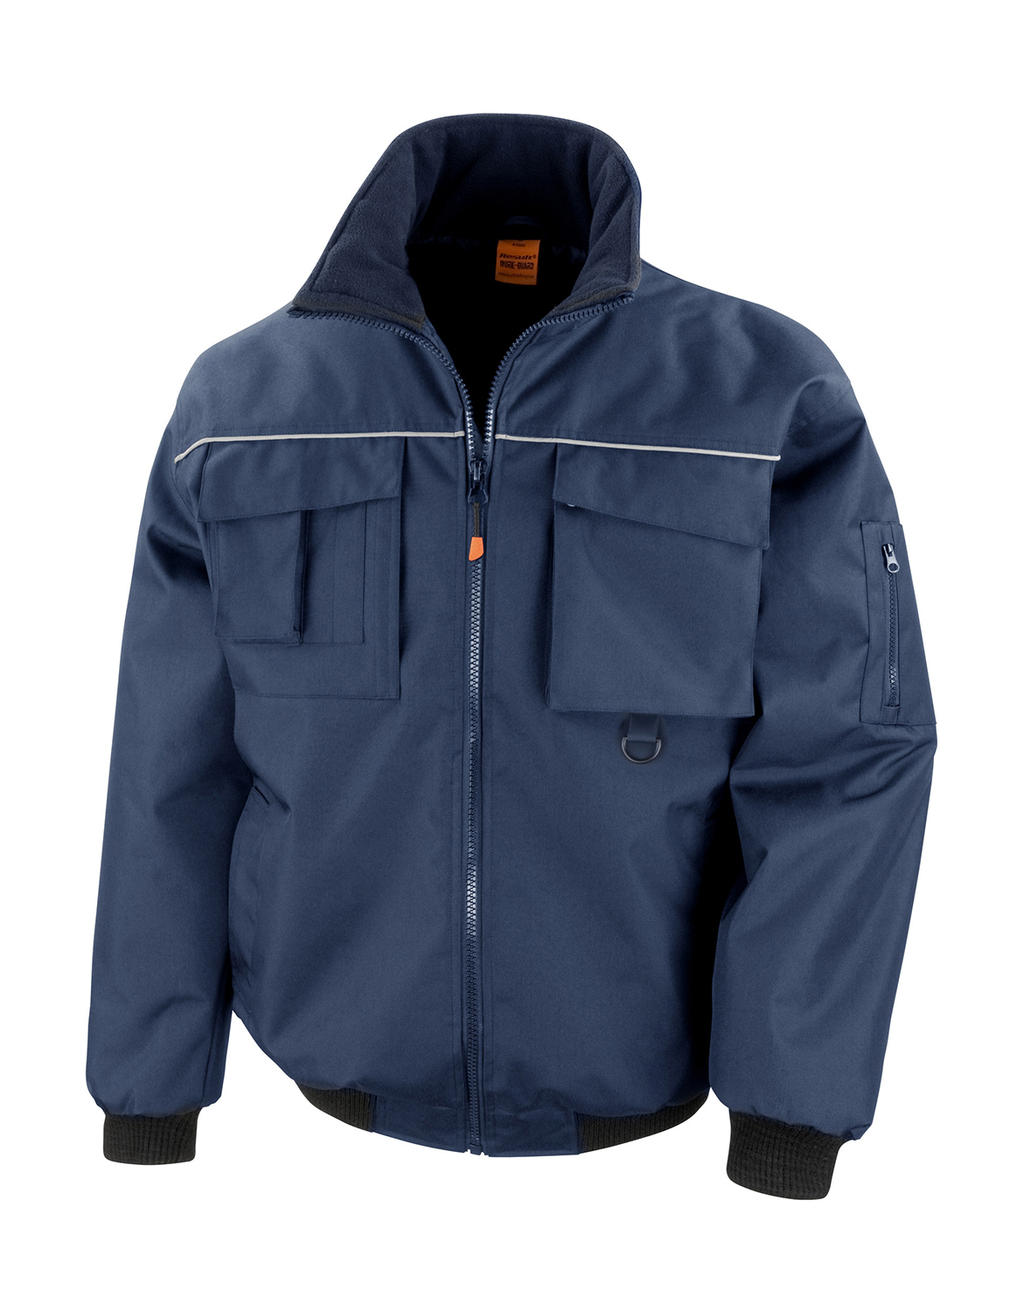  Work-Guard Sabre Pilot Jacket in Farbe Navy